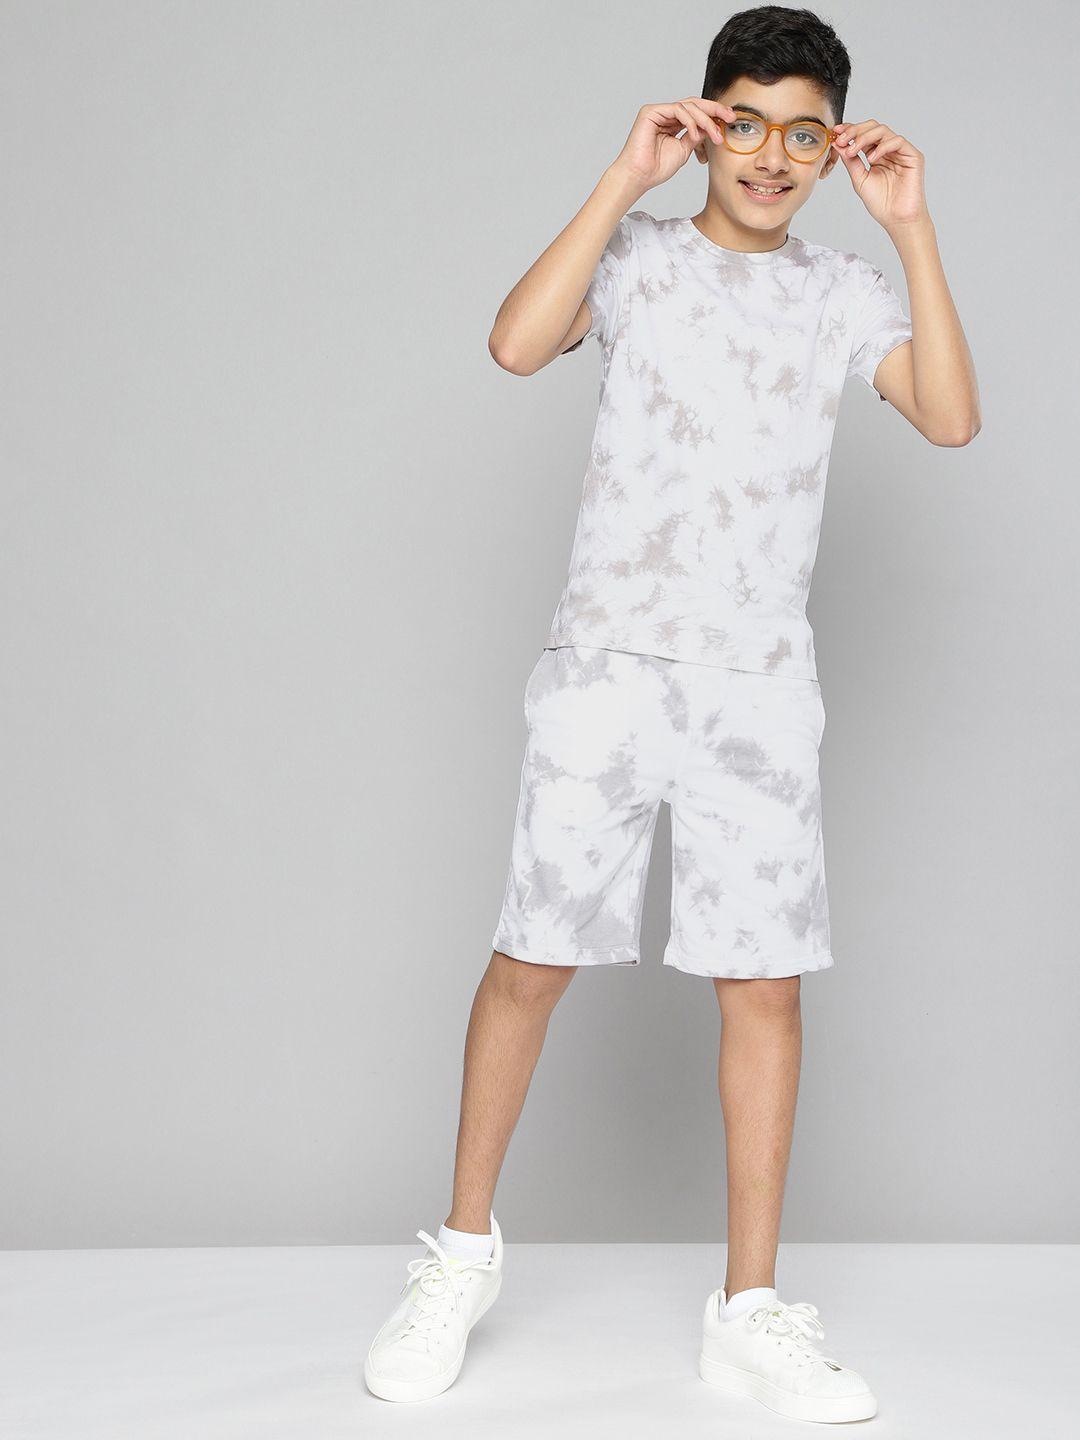 m&h juniors boys white & grey dyed t-shirt with shorts